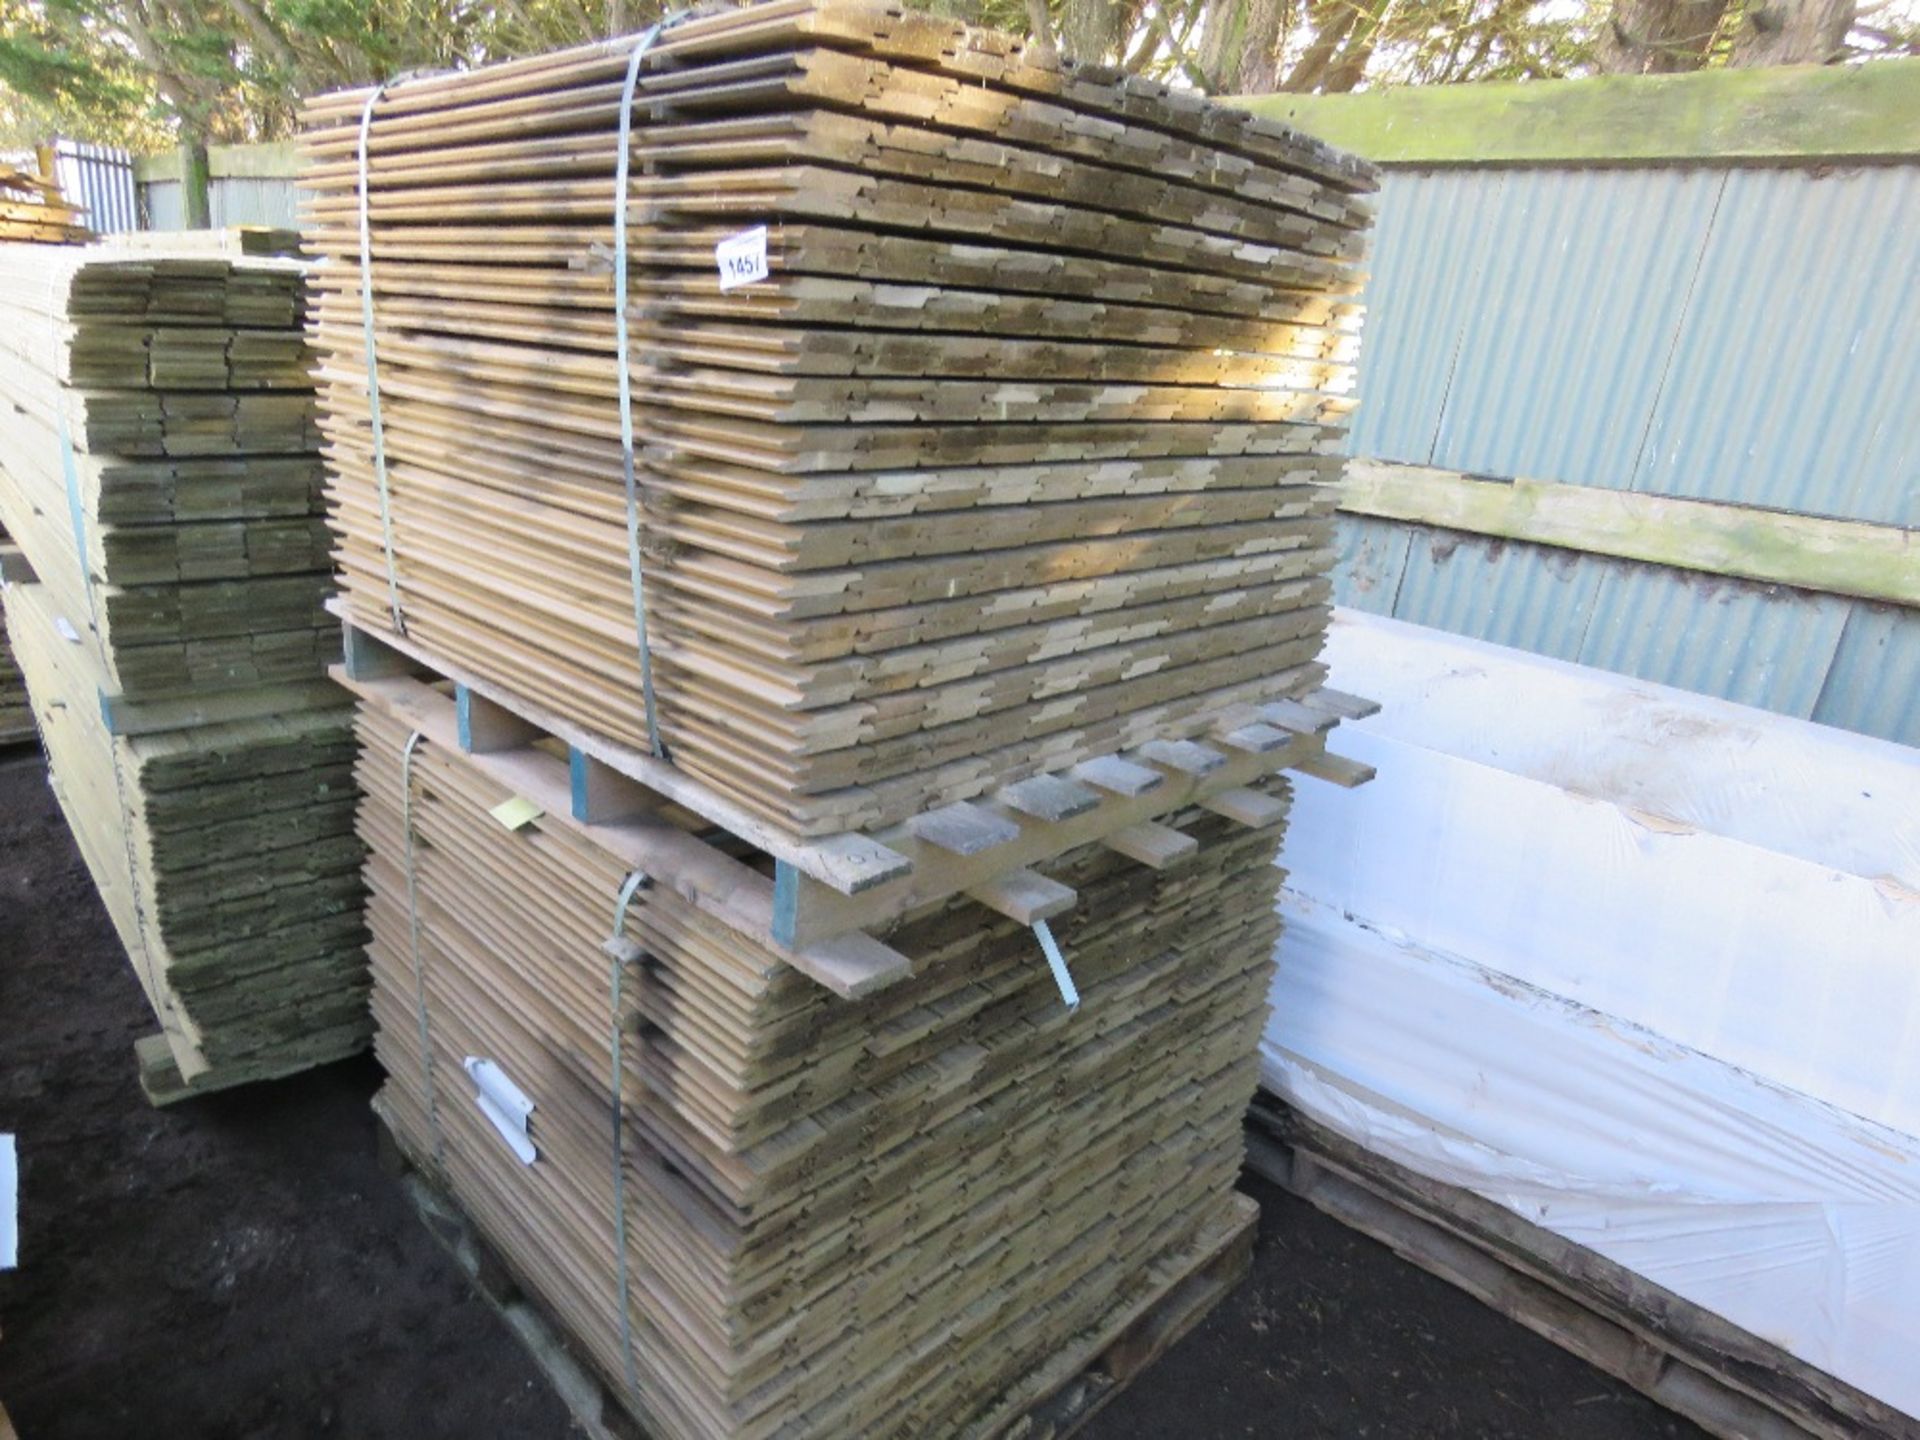 2 X PALLETS OF SHIPLAP PRESSURE TREATED FENCE CLADDING TIMBER BOARDS. 1.02M LENGTH X 95MM WIDTH APP